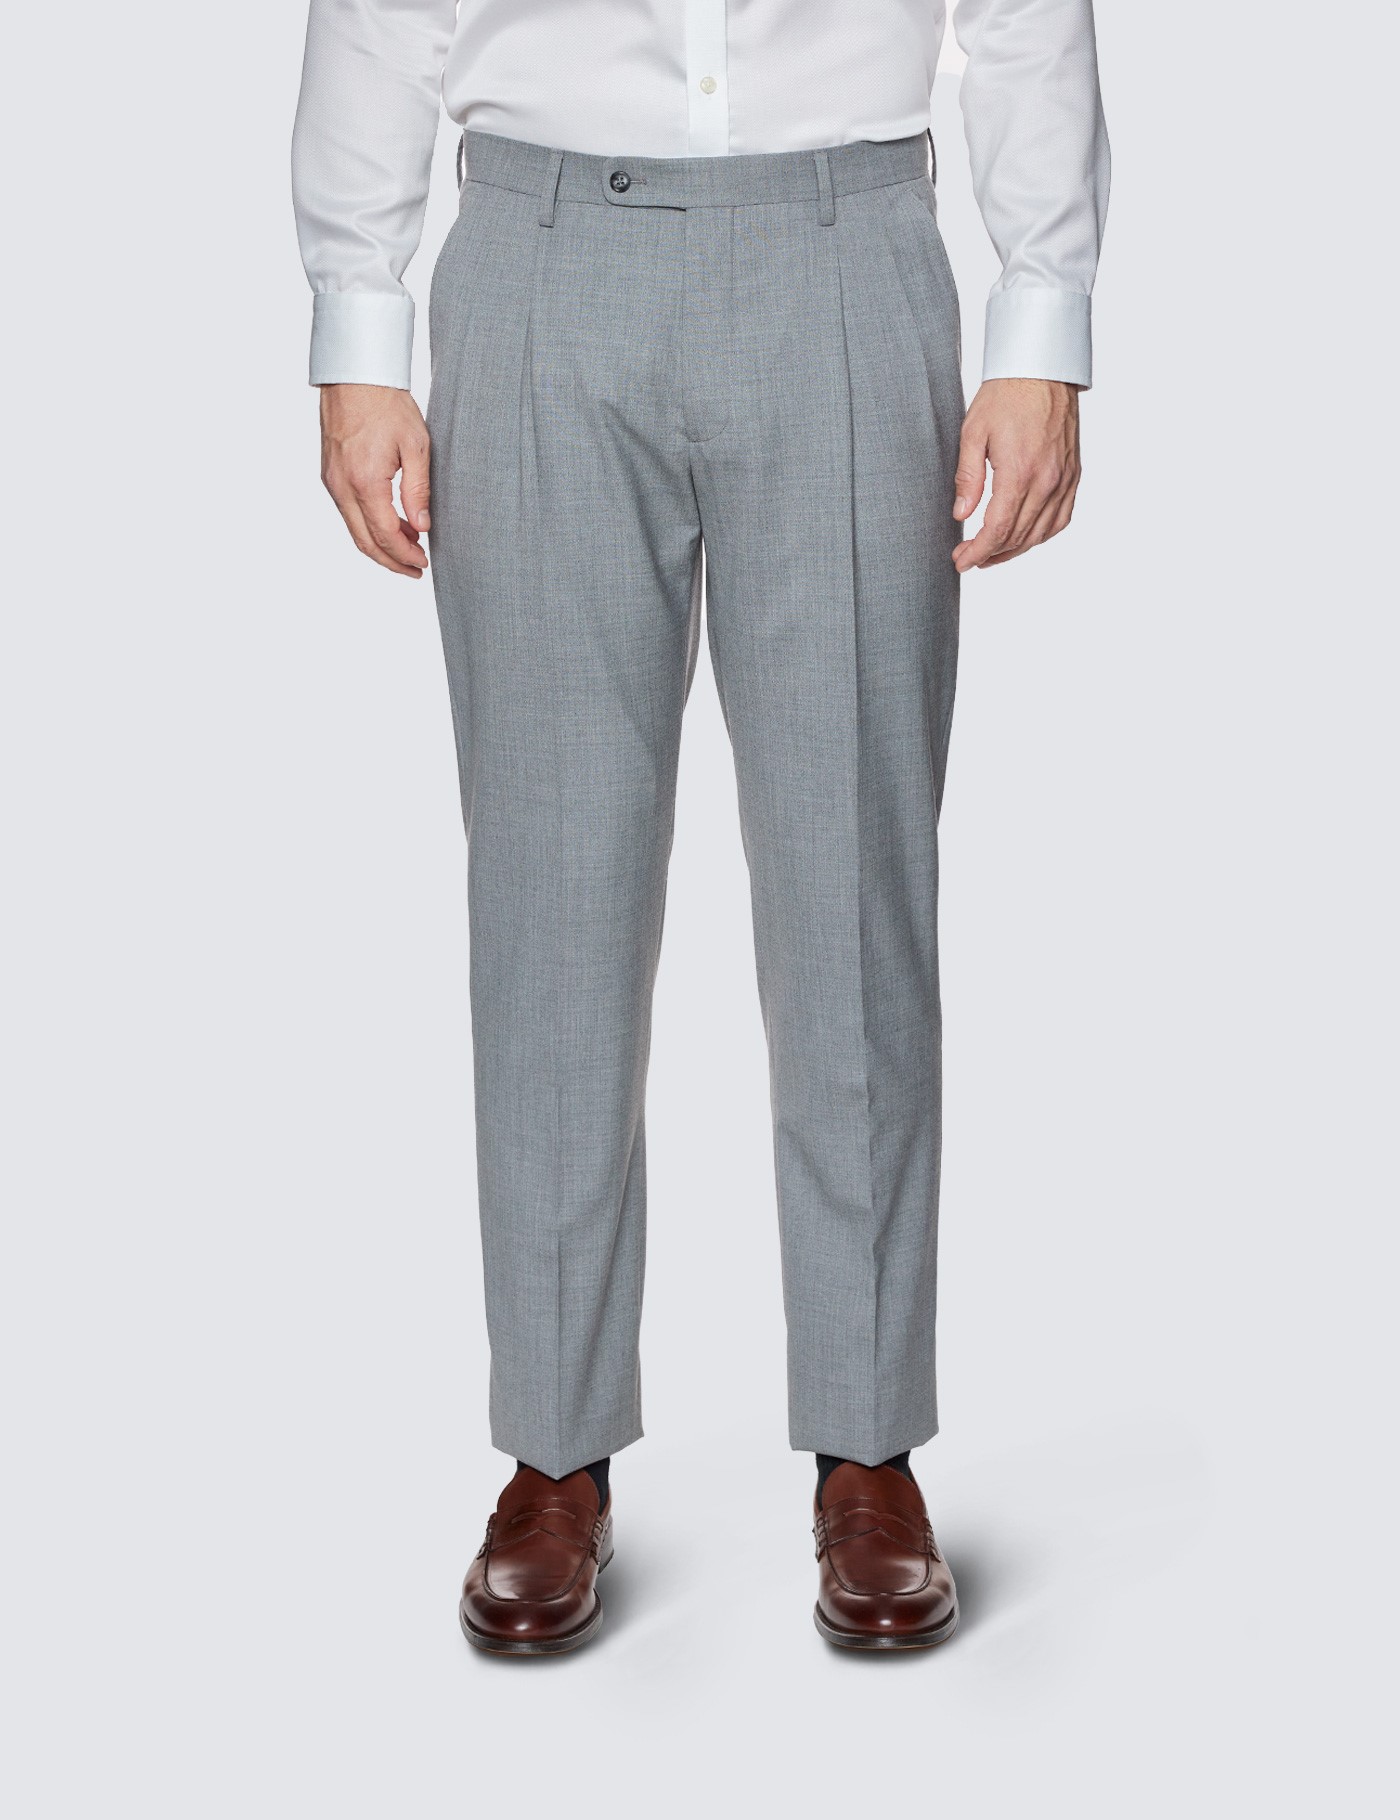 Men’s Grey Twill 100% Wool Pleated Trousers | Hawes & Curtis